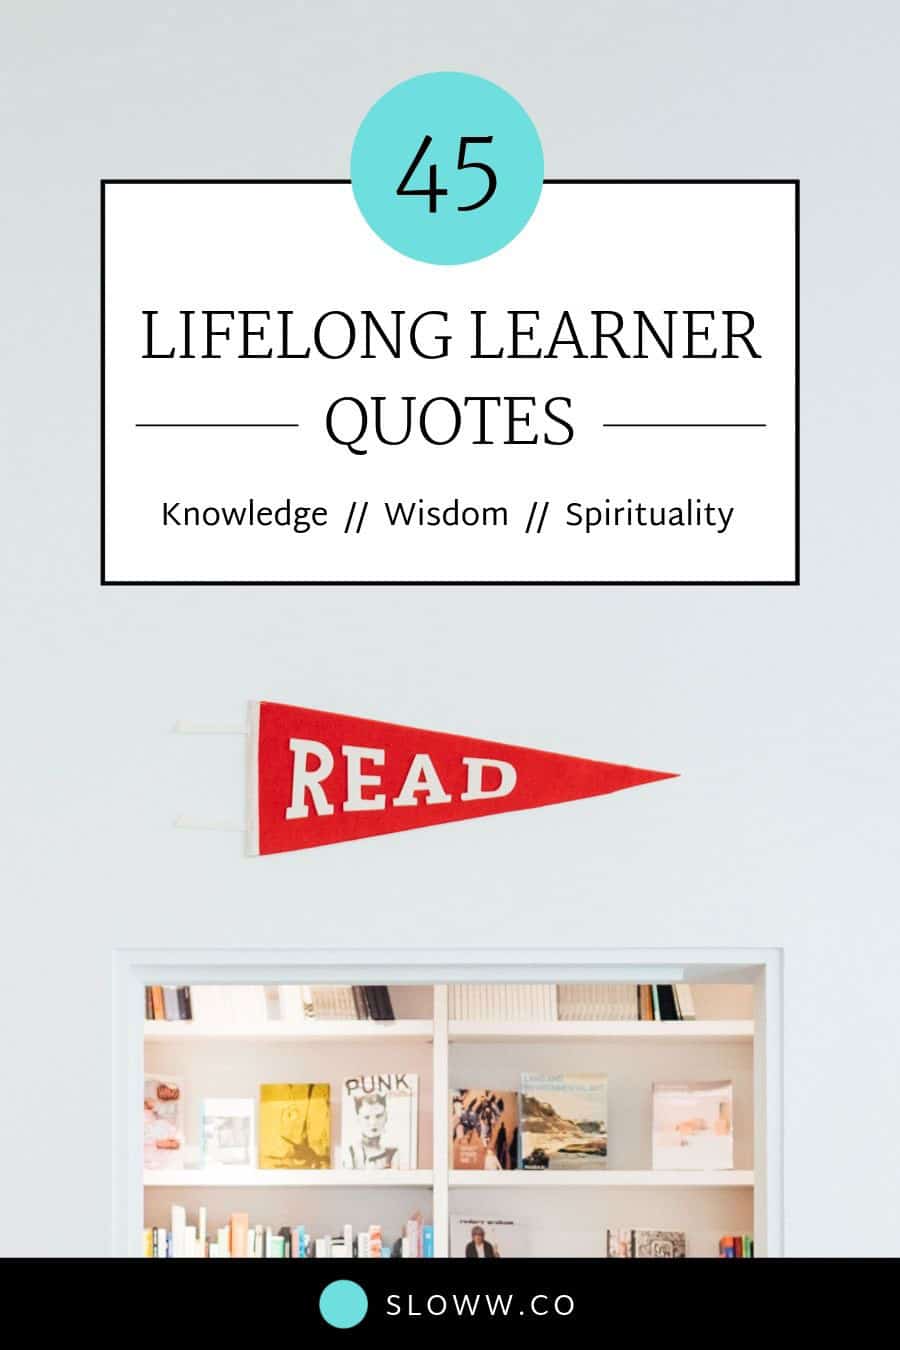 Sloww Lifelong Learning Quotes Infographic